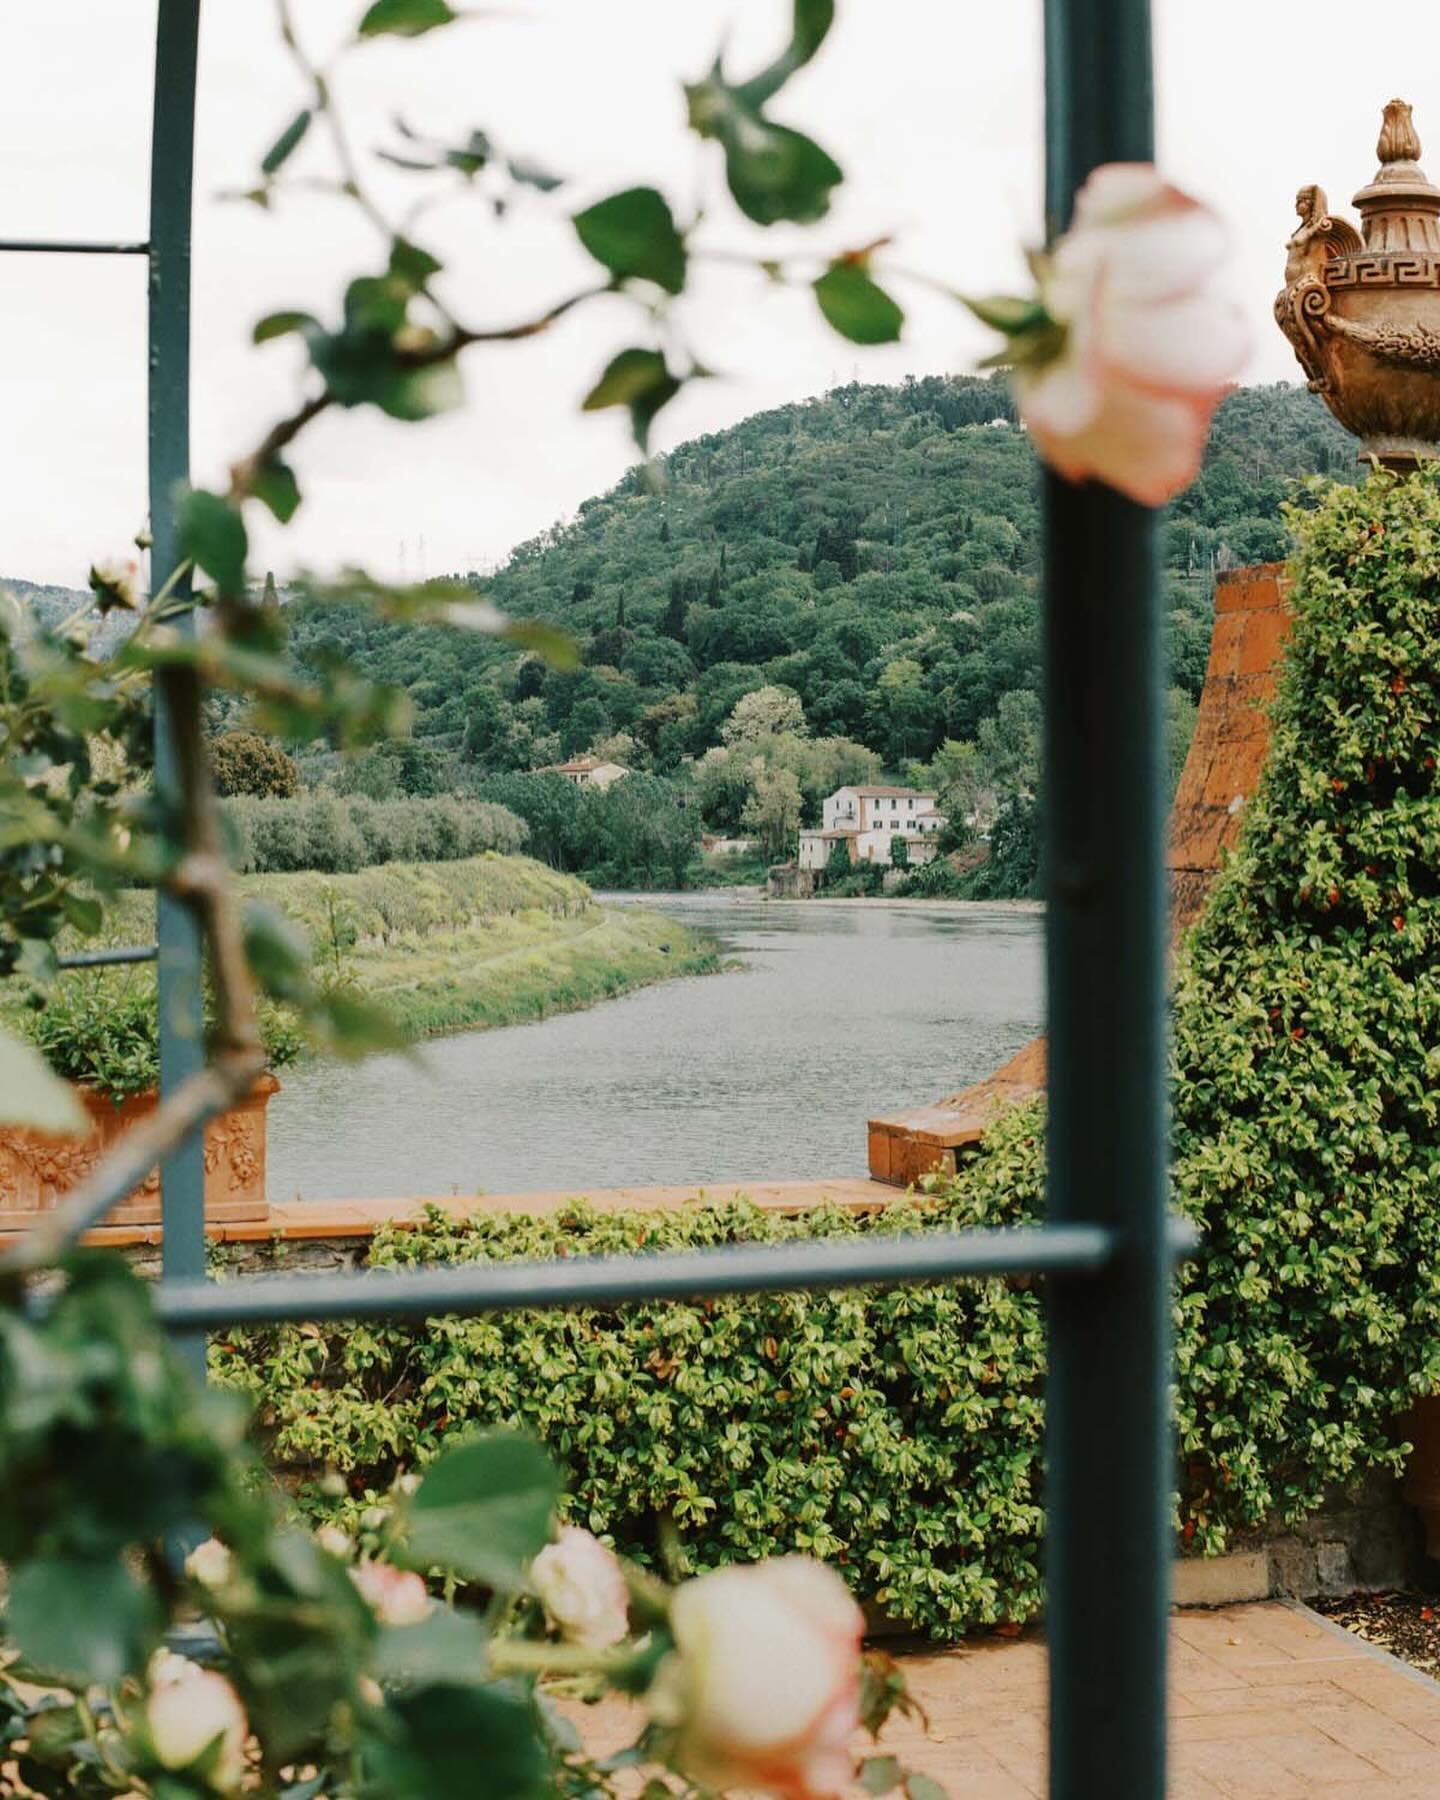 This weekend we&rsquo;ll be back at @villalamassaofficial celebrating with C+N exactly two years after this beautiful wedding for O+D and we can&rsquo;t wait! 

We&rsquo;re so excited for the amazing line up of weddings in Italy over the weeks to com